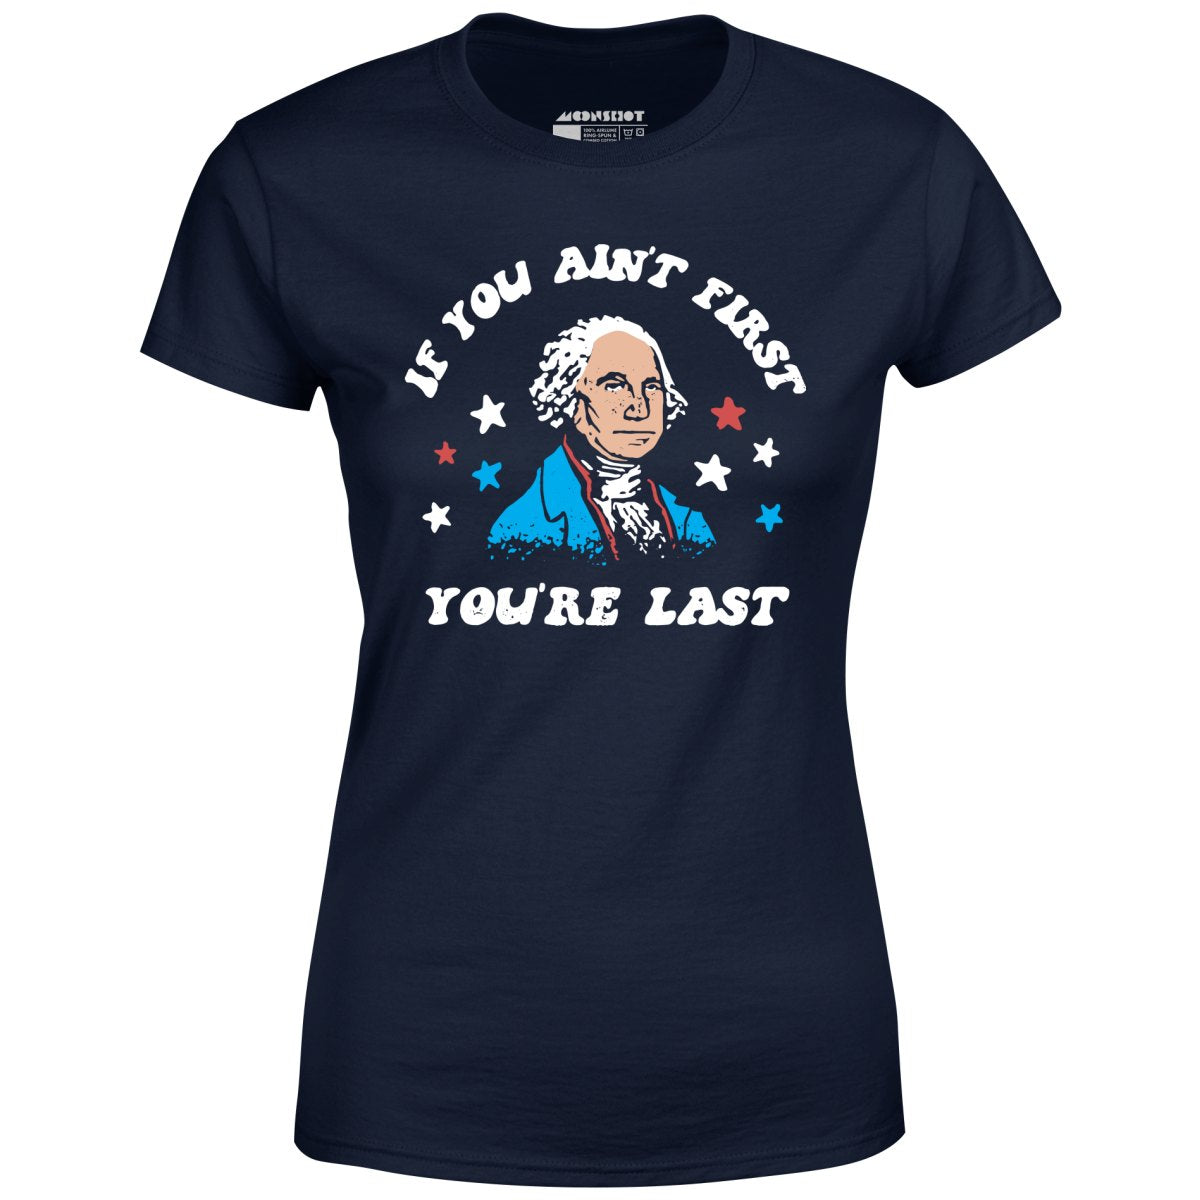 If You Ain't First You're Last - Women's T-Shirt